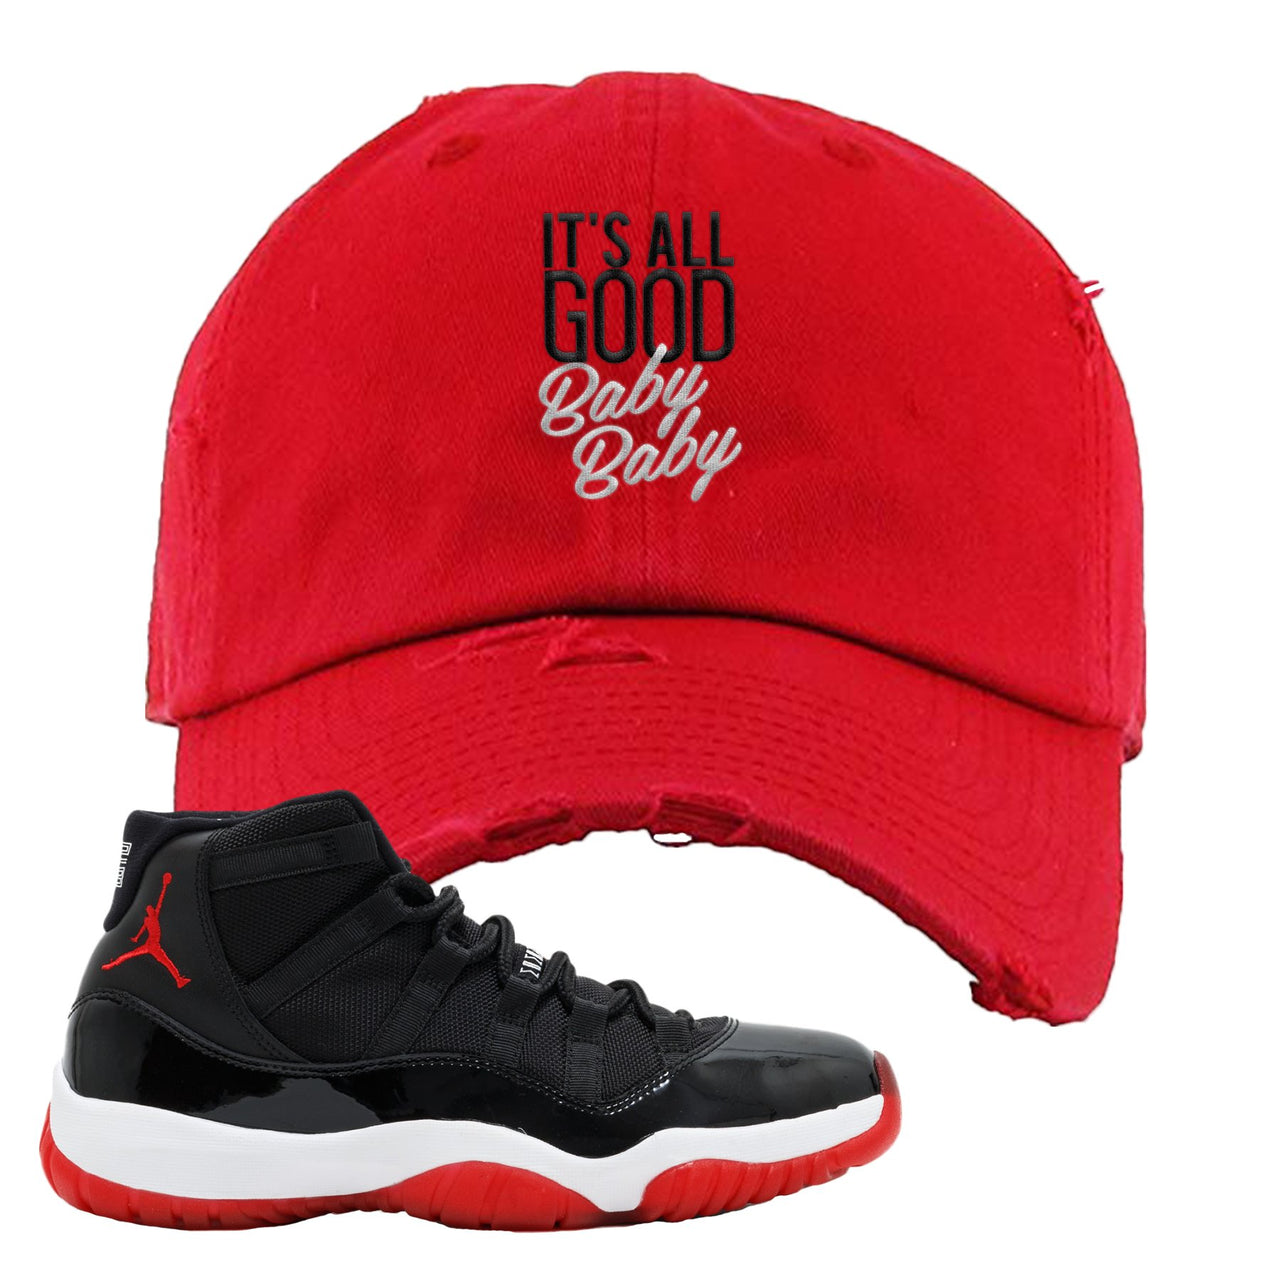 Jordan 11 Bred It's All Good Baby Baby Red Sneaker Hook Up Distressed Dad Hat